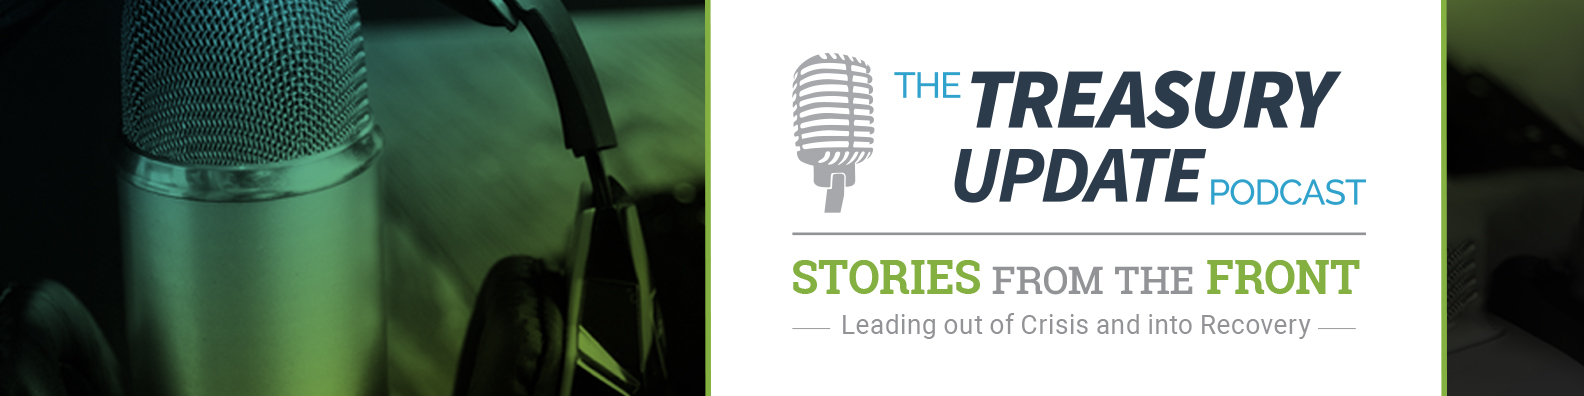 Stories from the Front - A Treasury Update Podcast Series